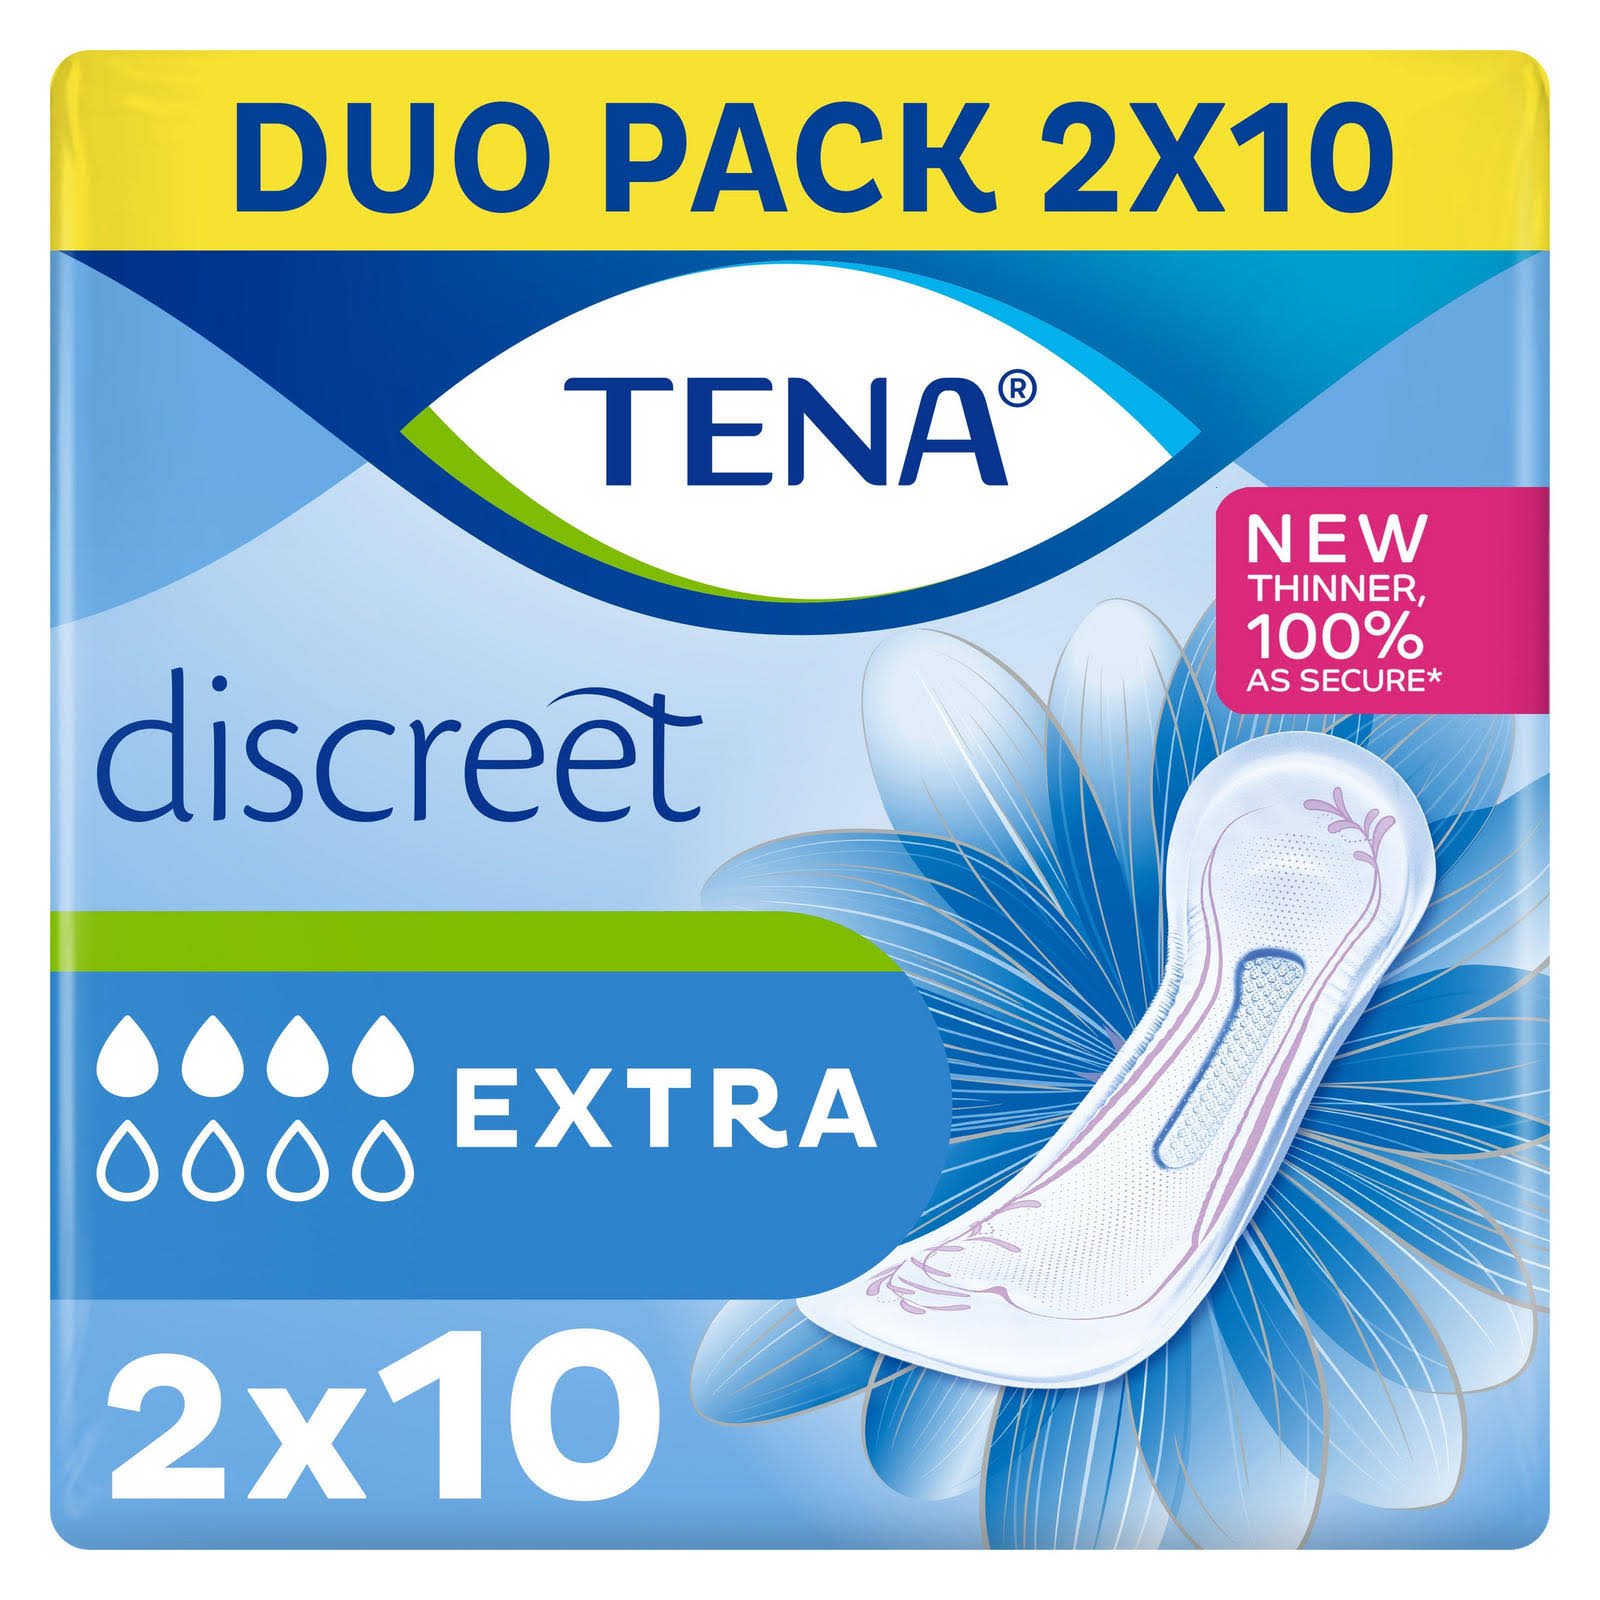 Tena Lady Extra Pads Duo Pack 2 x 10 Pads